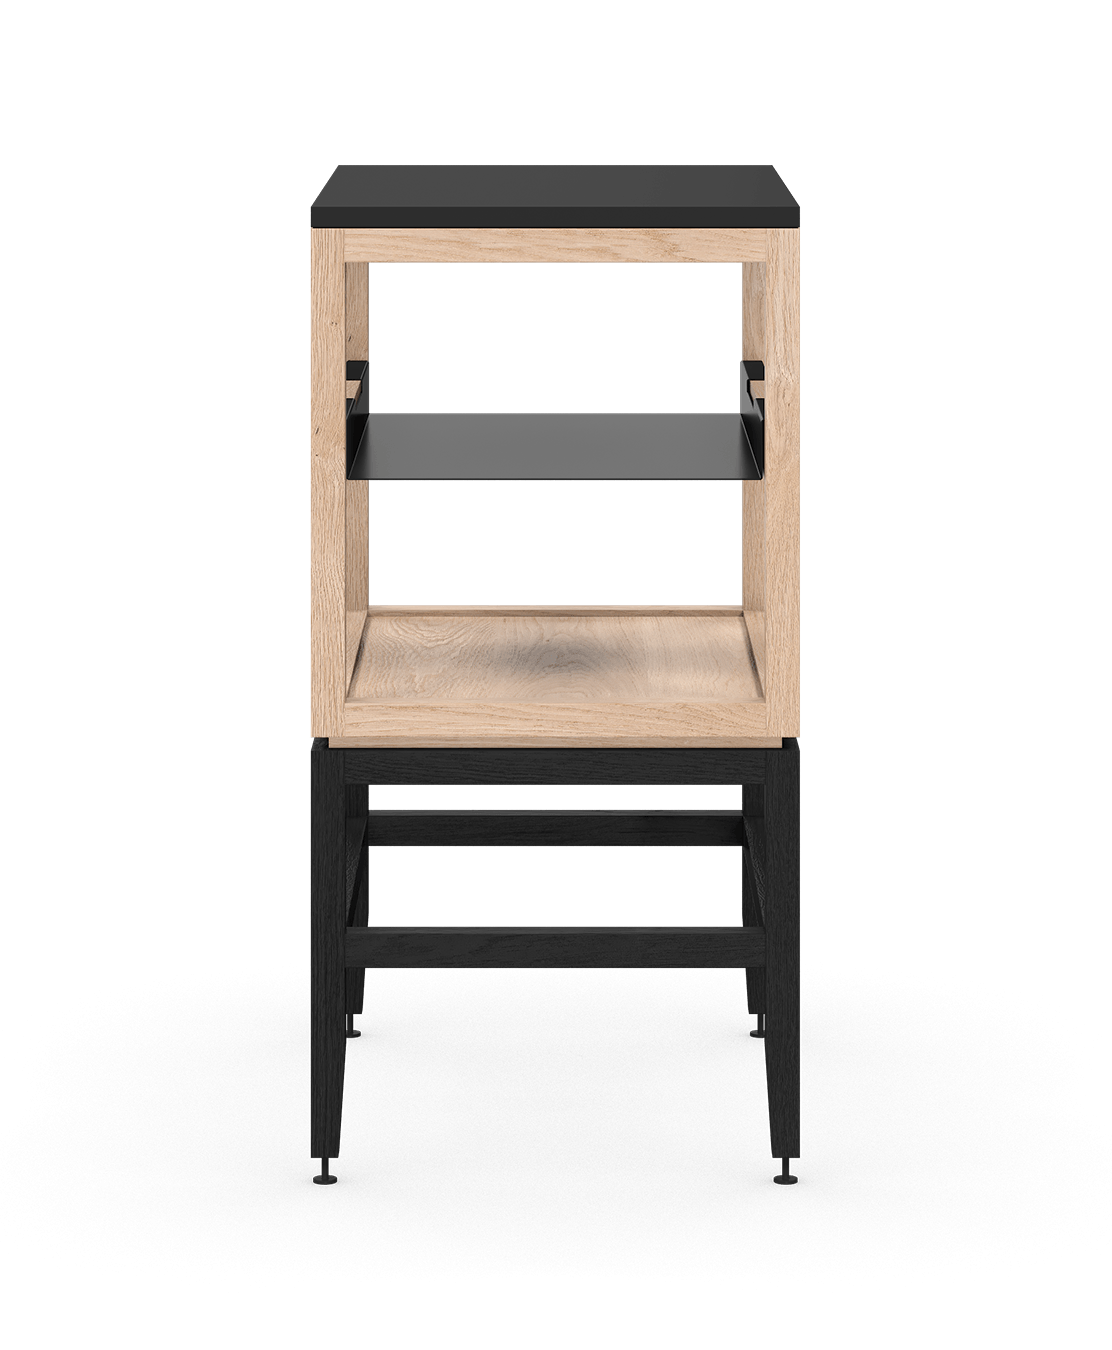 Coquo modular open kitchen cabinet in natural and black stained oak with metal shelf. 